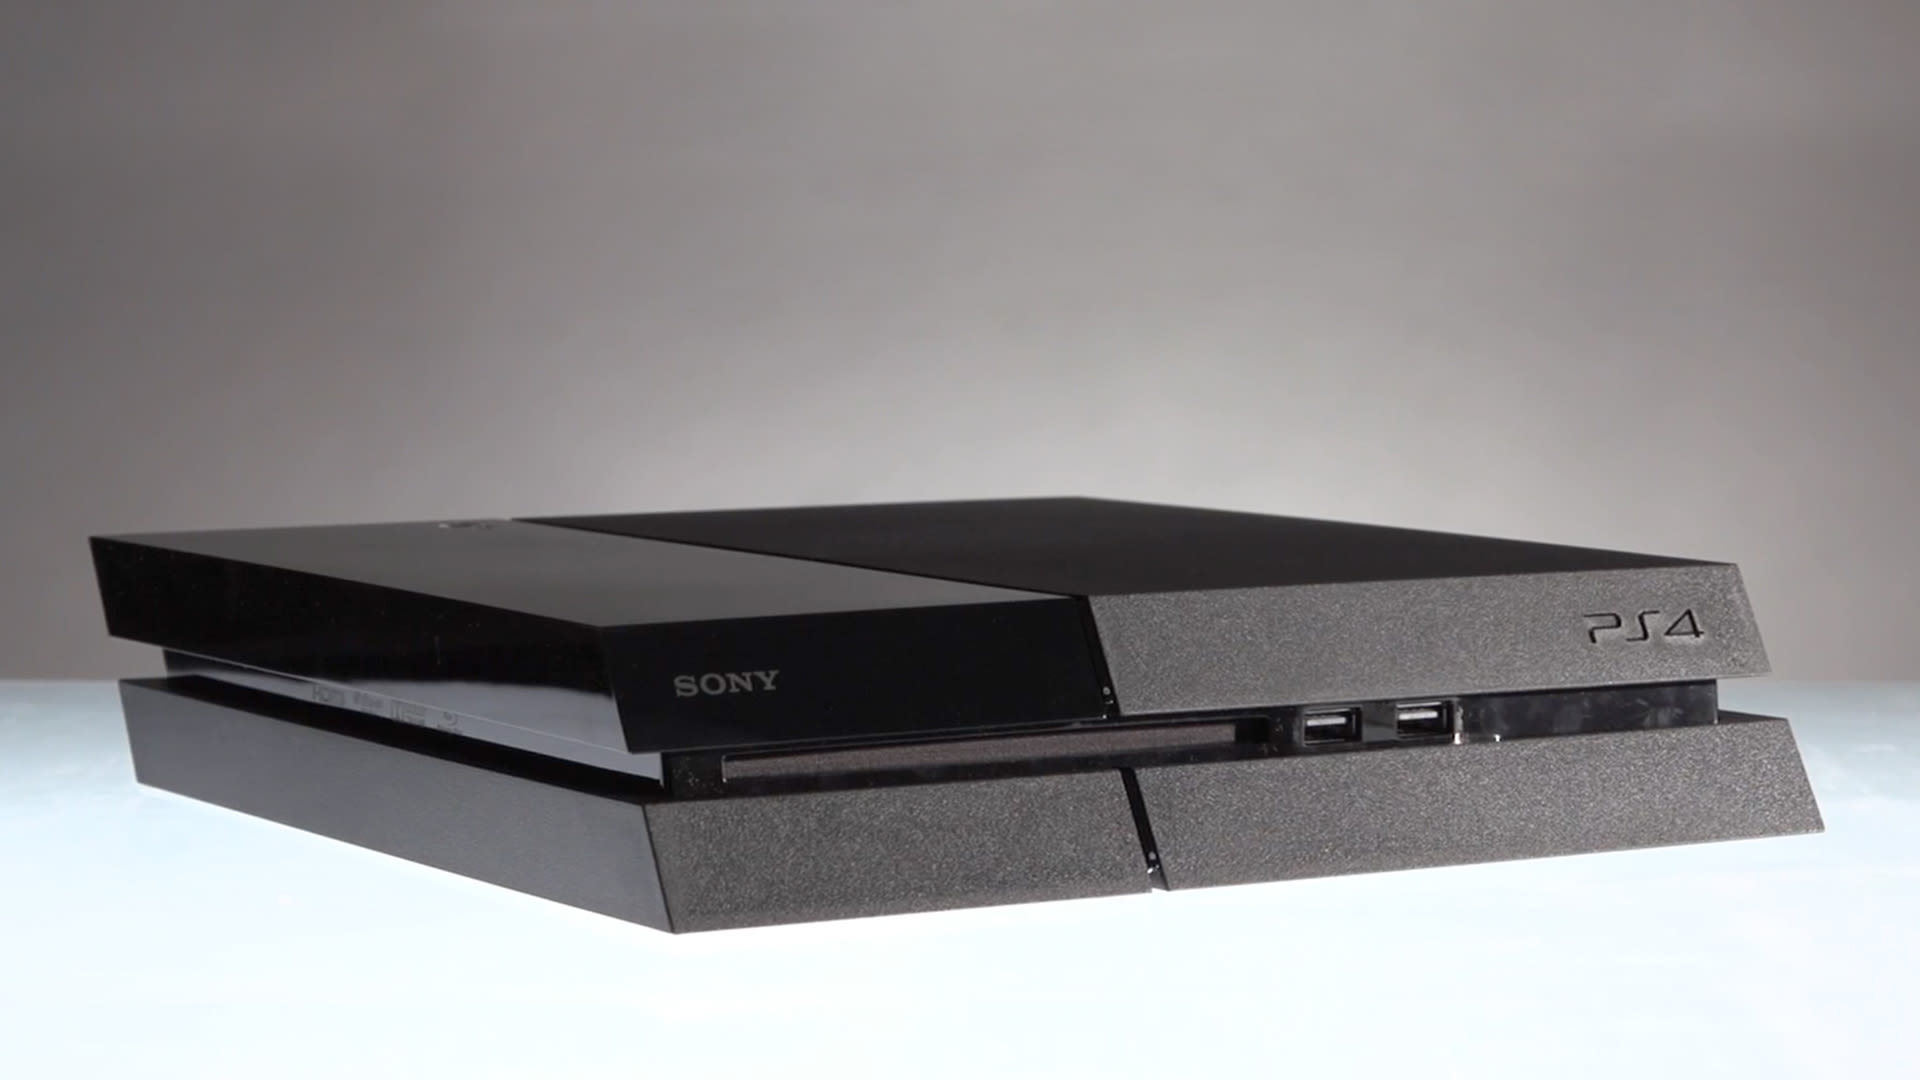 Overtræder For tidlig aflevere Watch PlayStation 4: Unboxing the New Game Console | Gadget Lab | WIRED